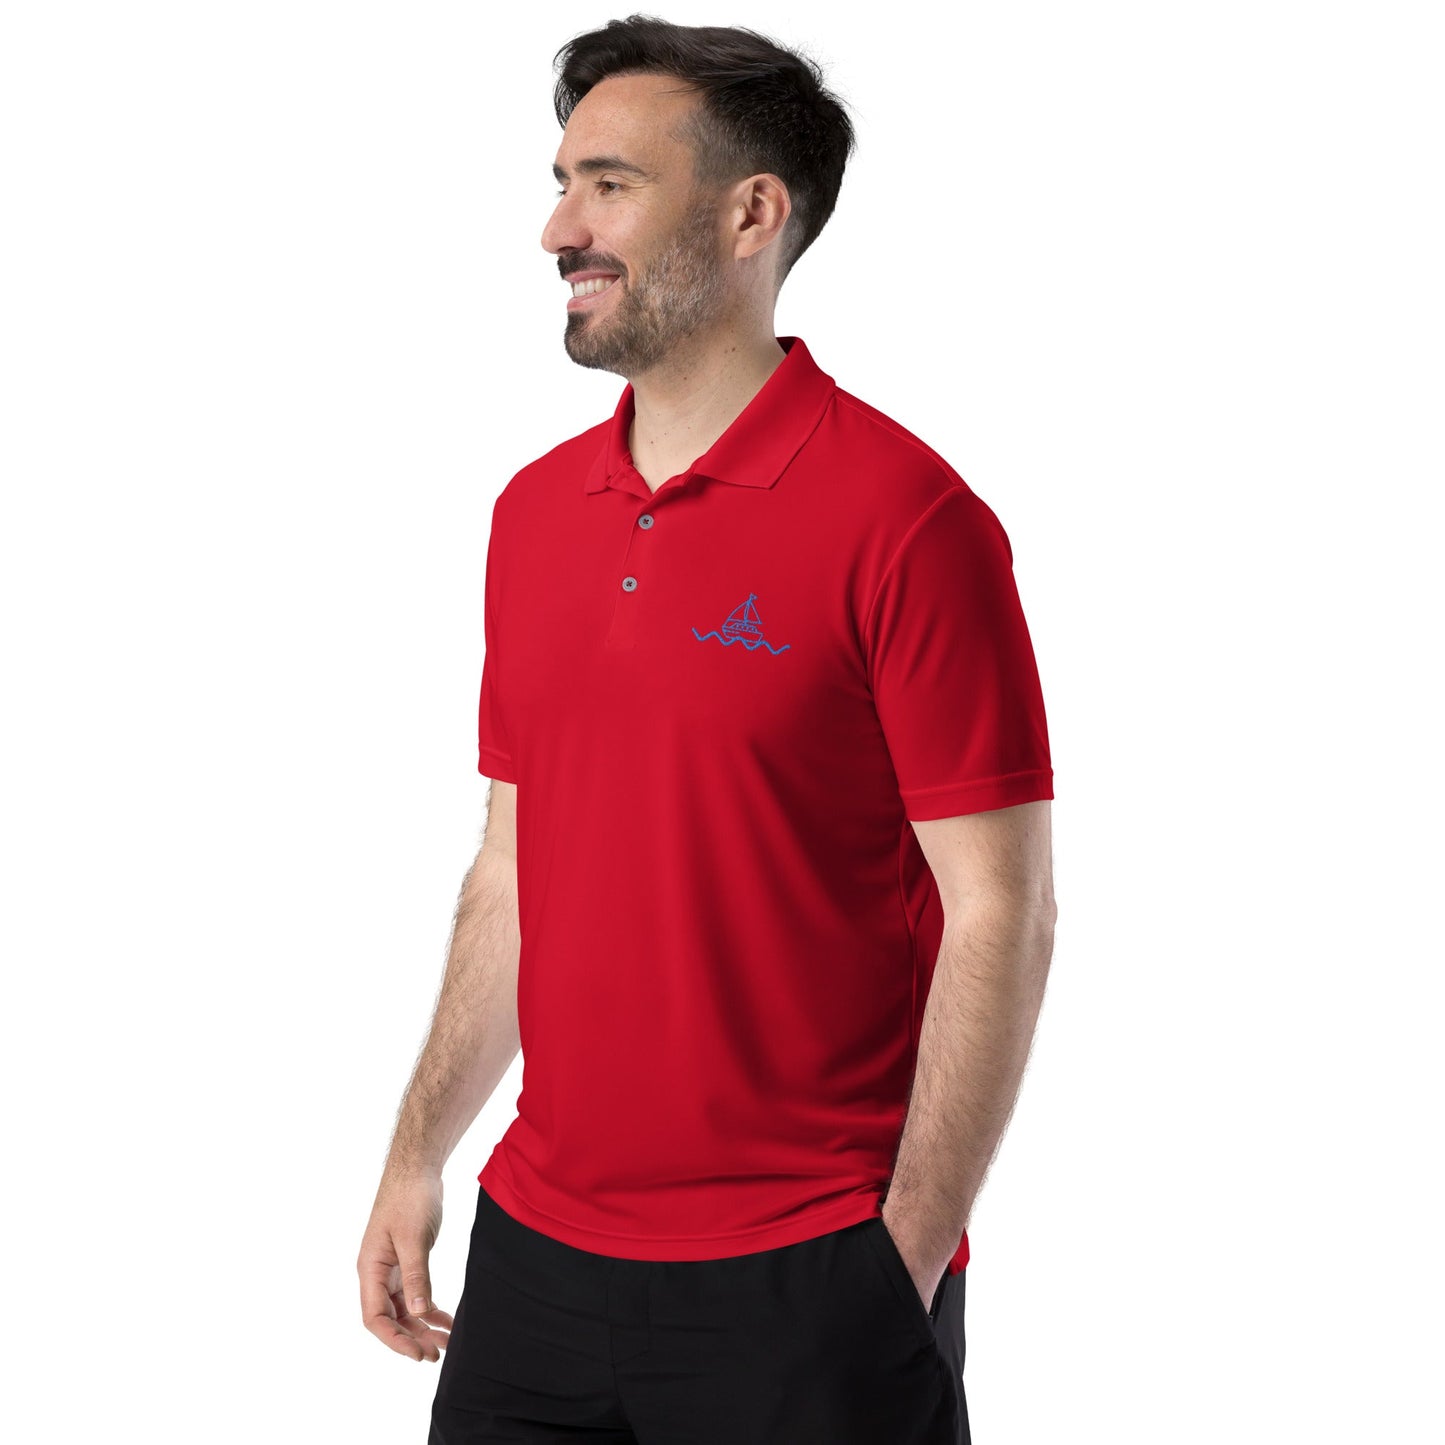 Icespheric Adidas Recycled Polyester Polo Shirt with UPF Protection